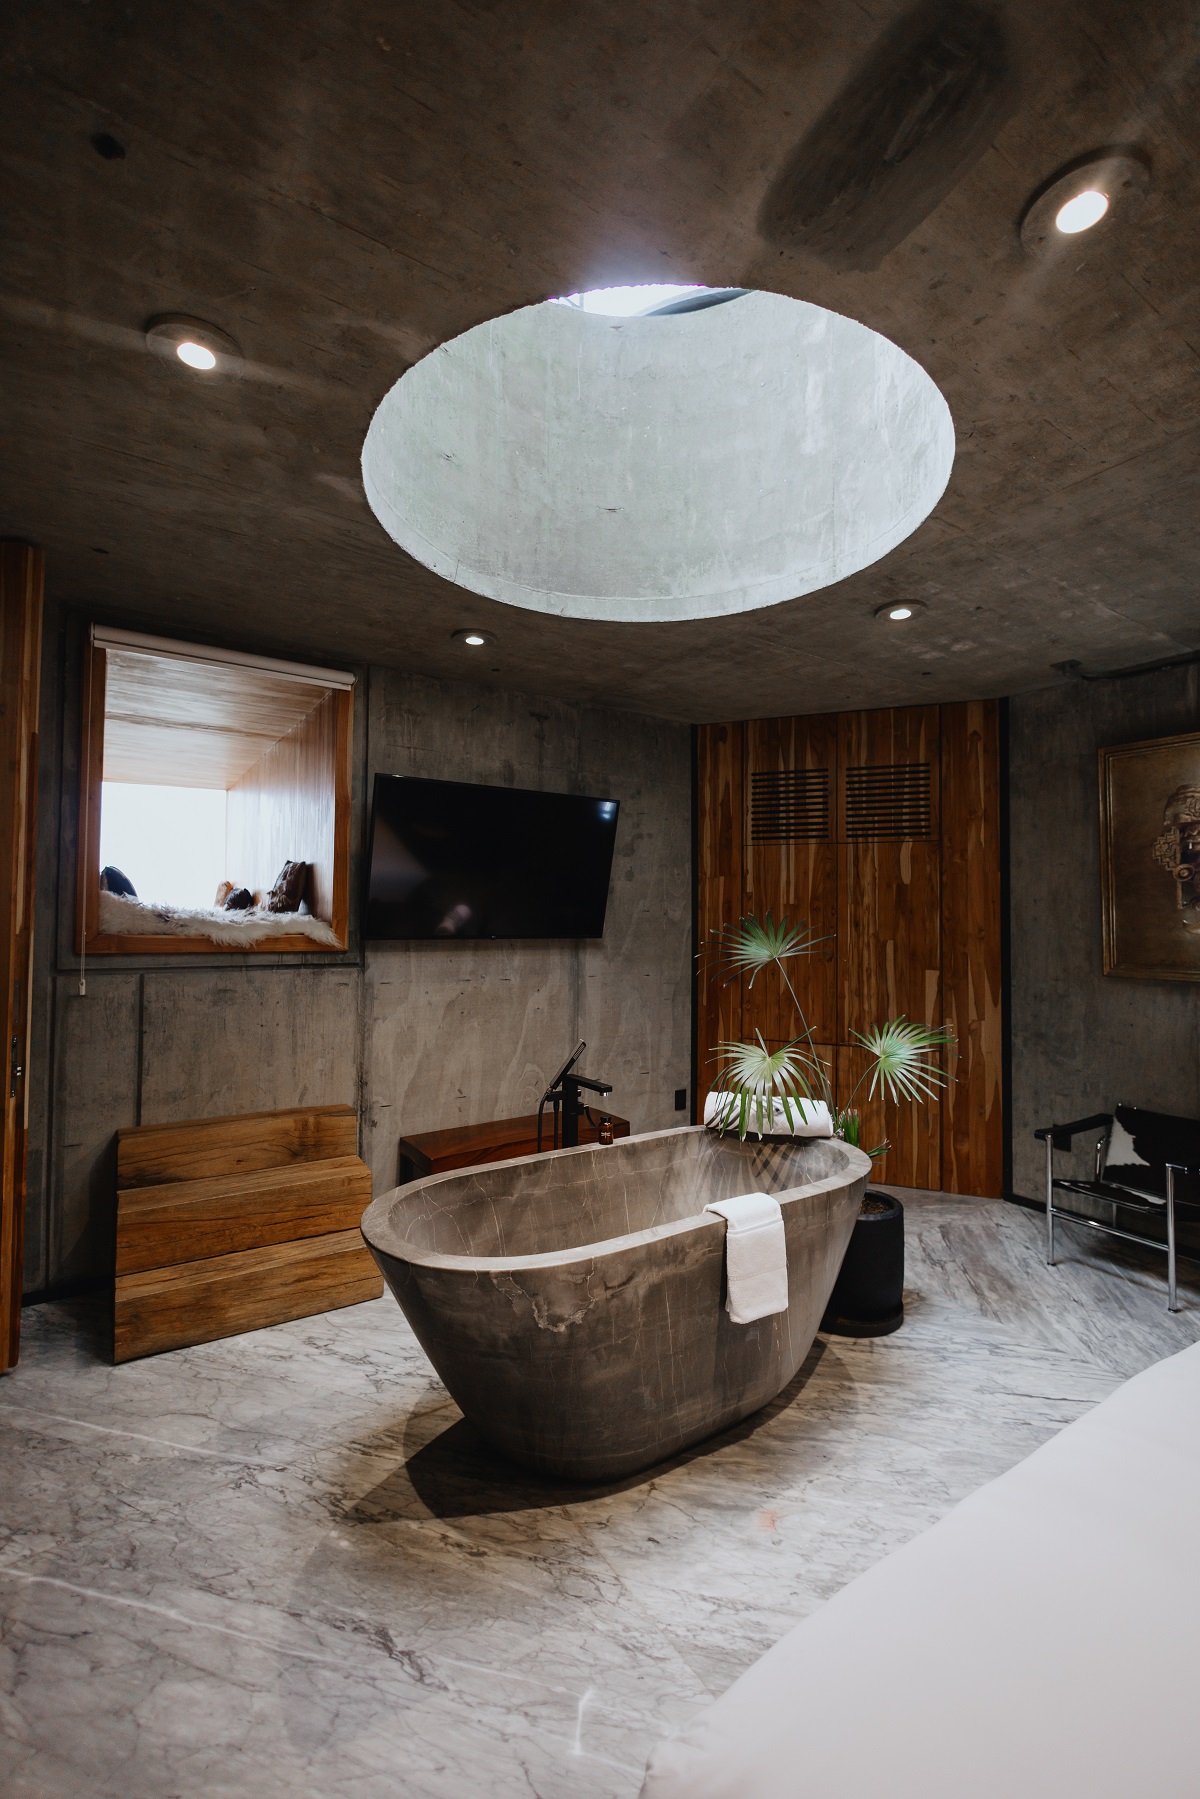 bathroom designed in wood and concrete with concrete freestanding bath directly blow circular window